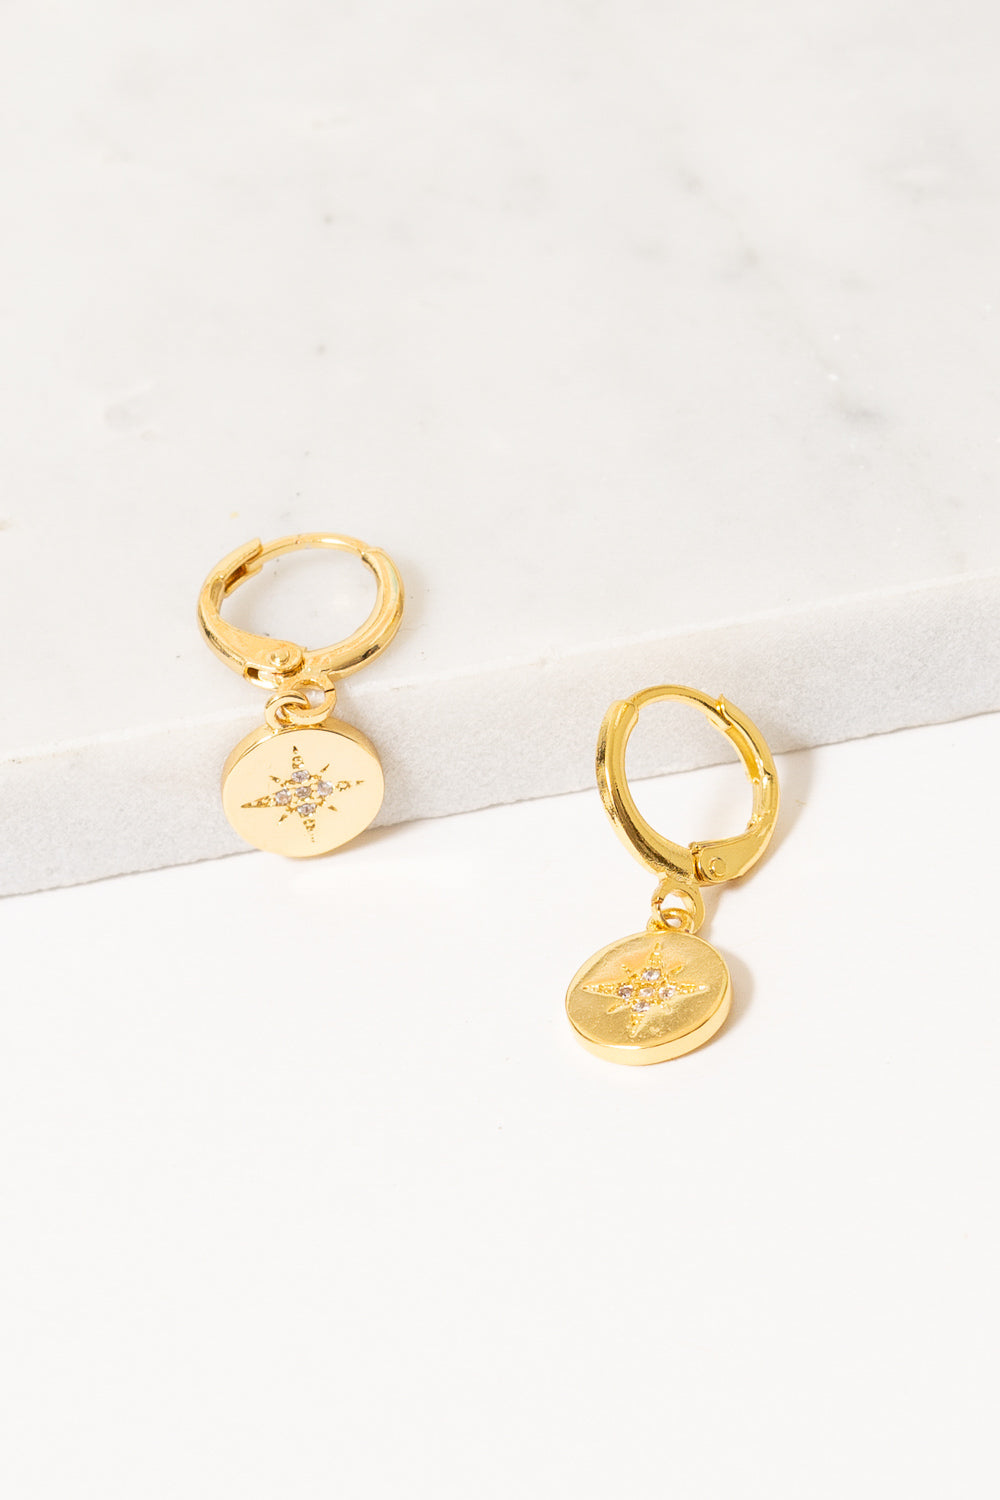 gold huggie hoop earrings with starburst charm dangles by Janna conner